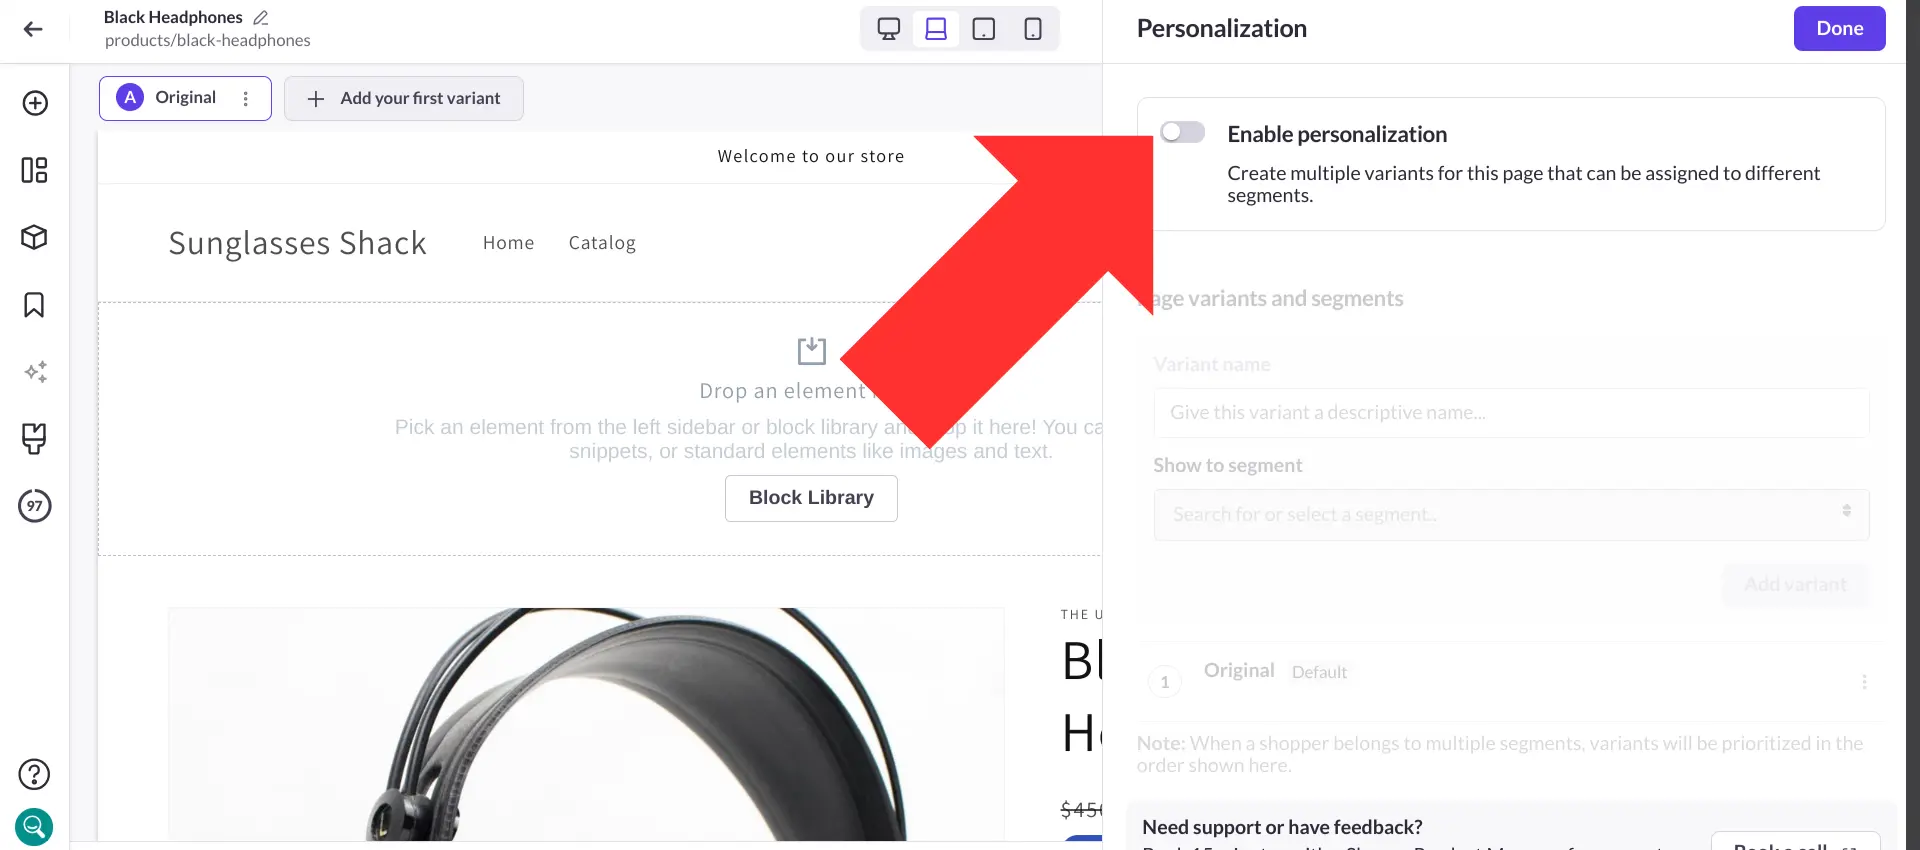 Toggle the “Enable personalization” option on.